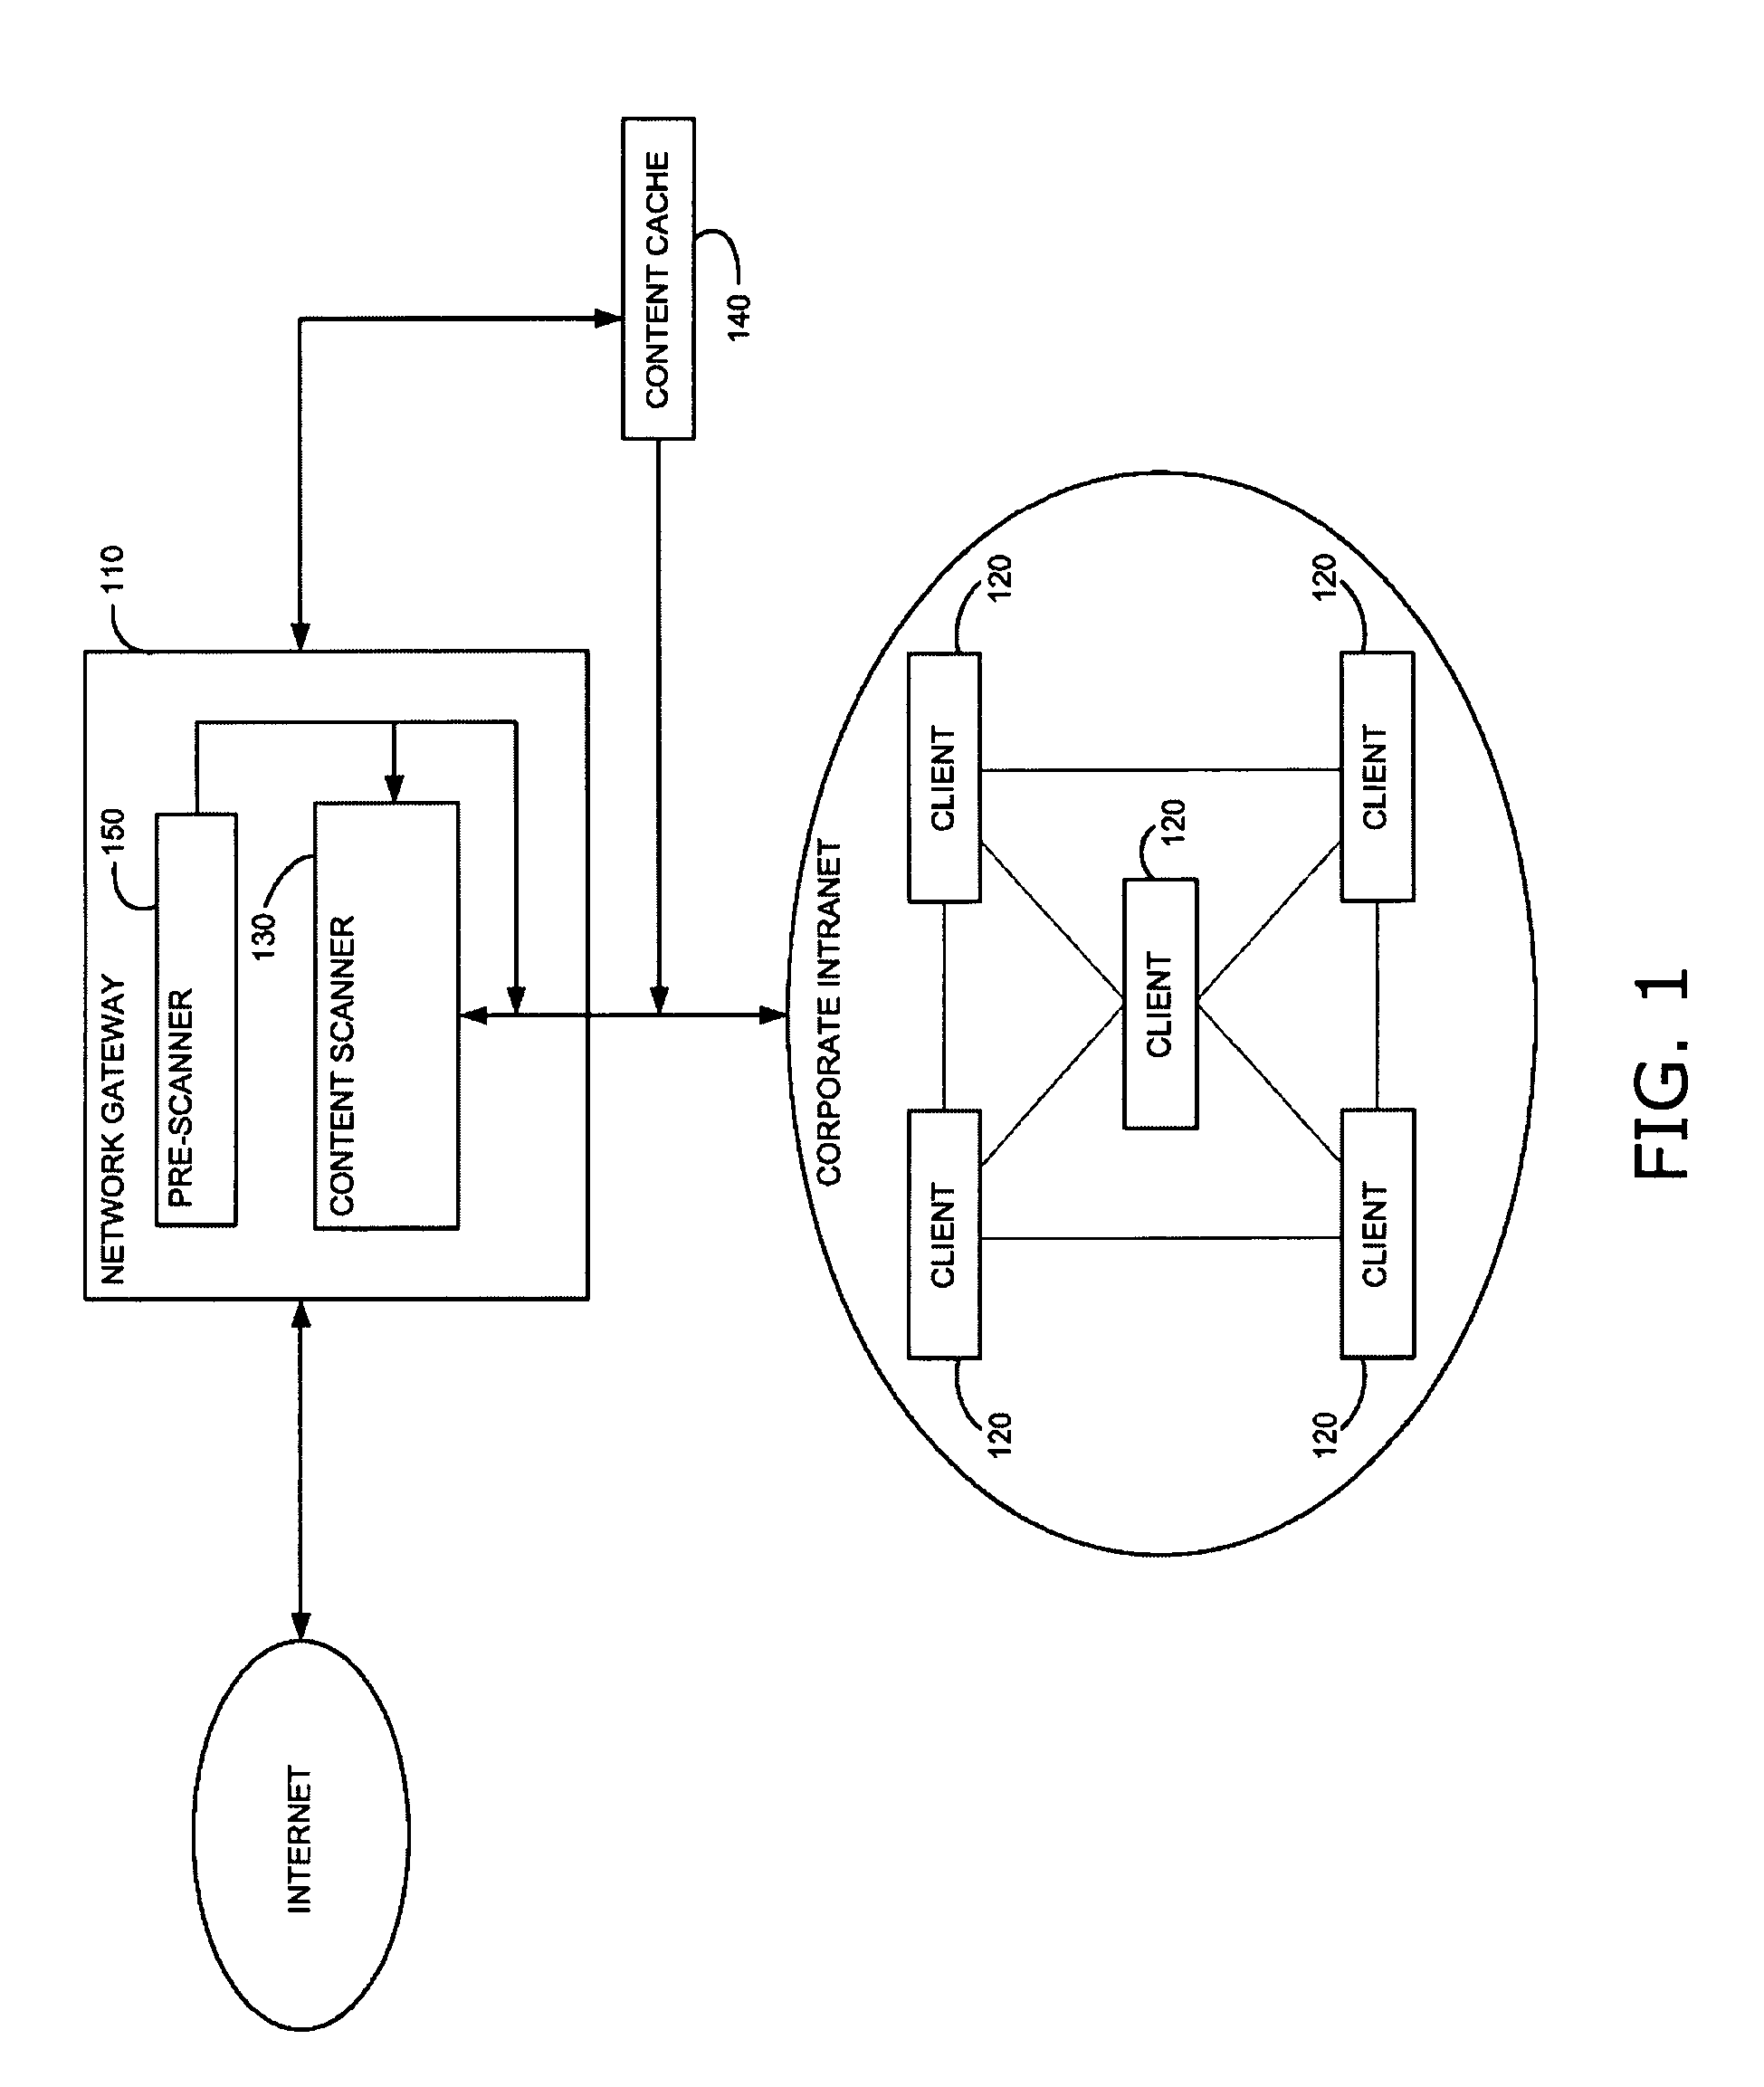 Method and system for adaptive rule-based content scanners